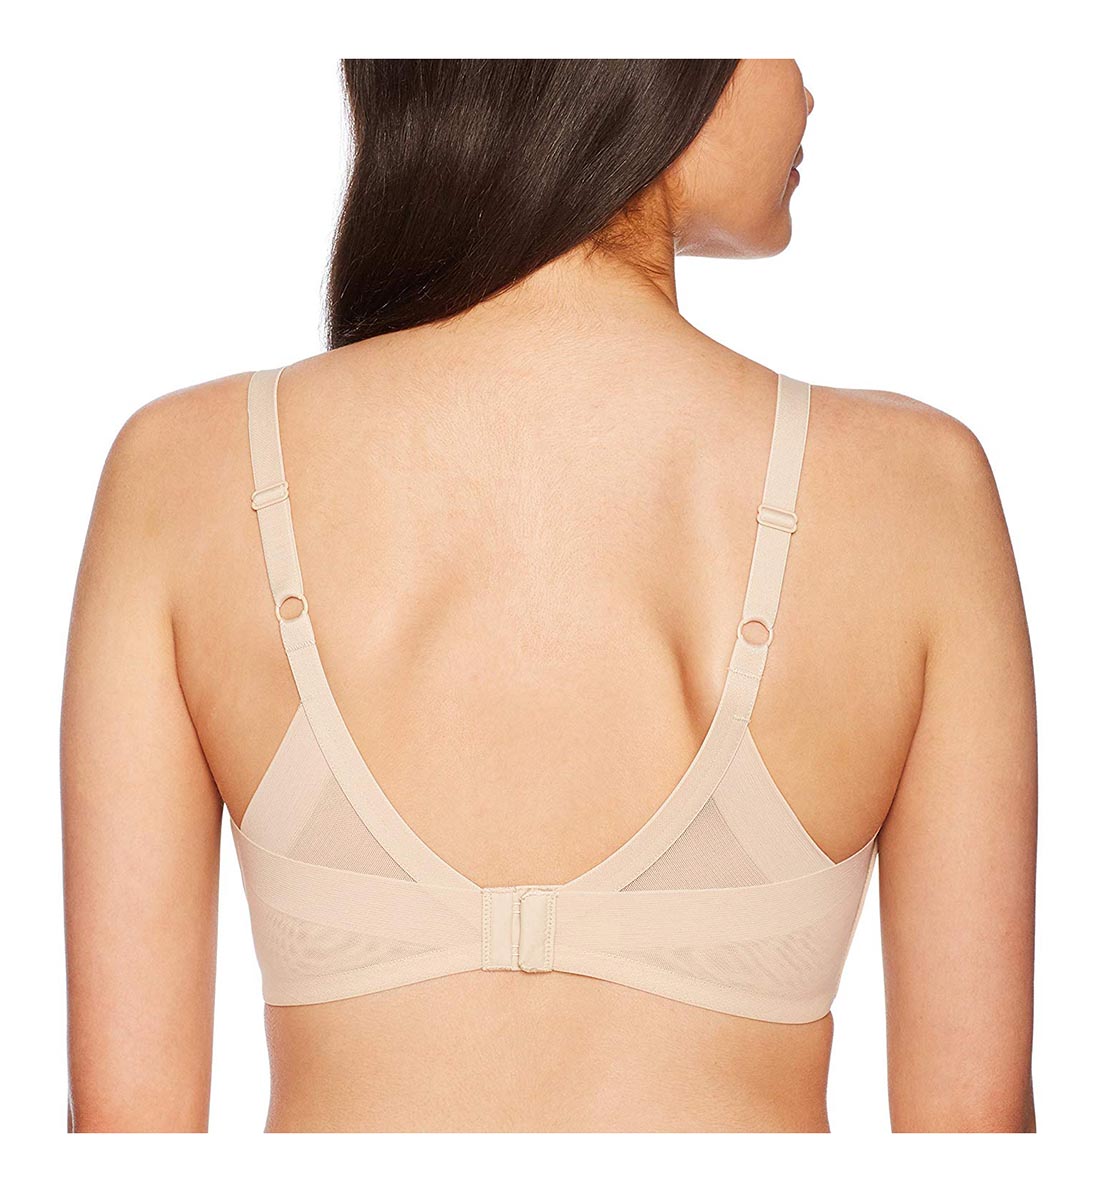 Wacoal Ultimate Side Smoother Wire Free Contour T-Shirt Bra (852281),34B,Sand - Sand,34B